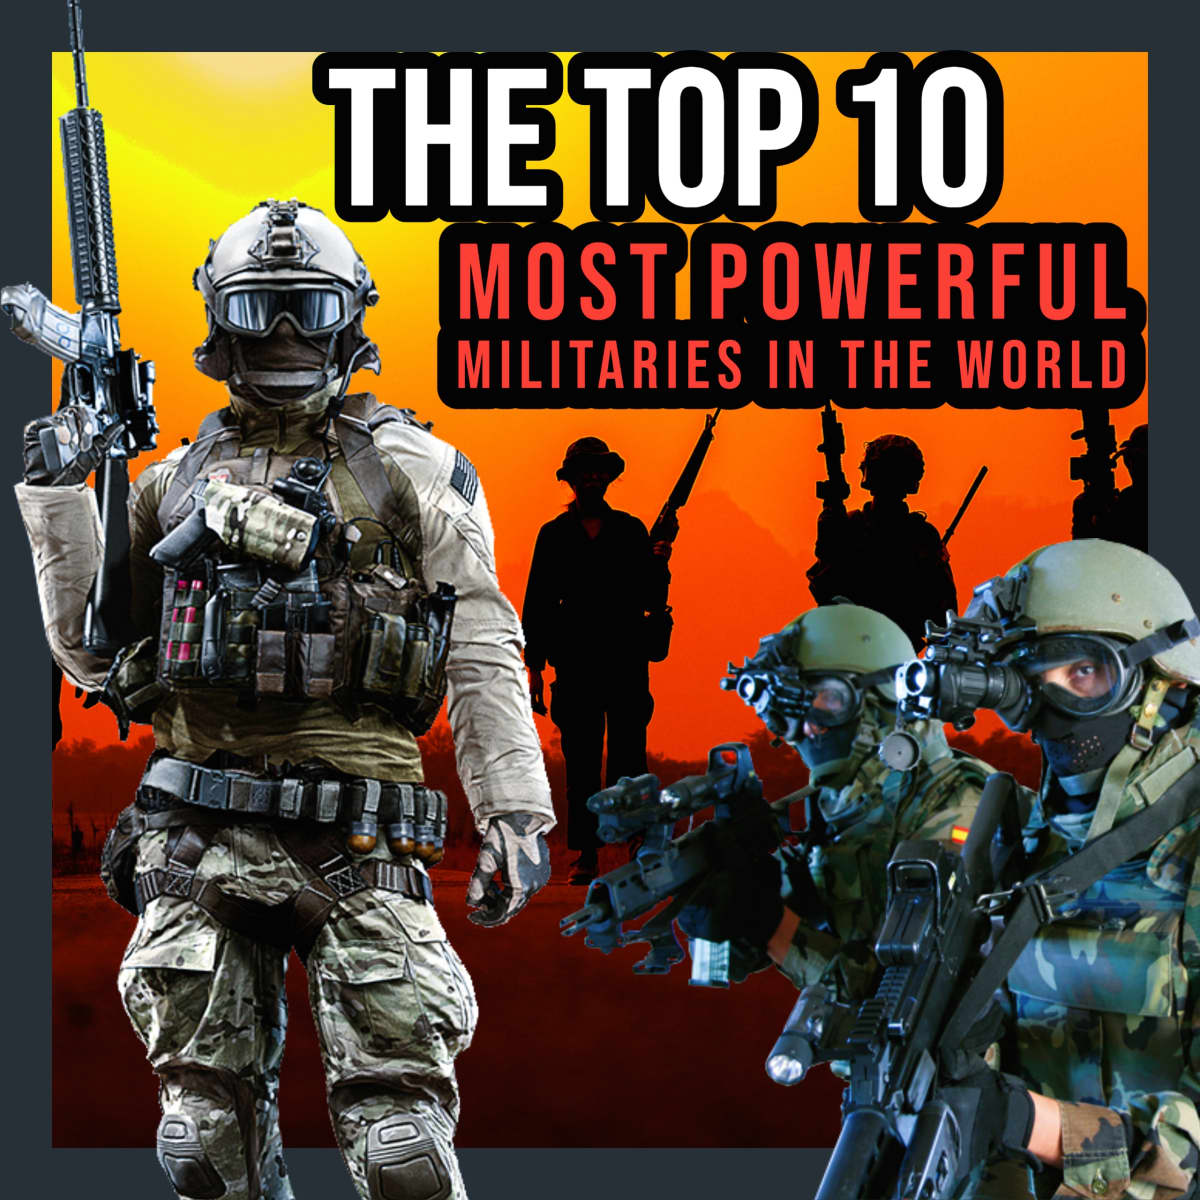 Top 10 Most Powerful Land Forces In the World 